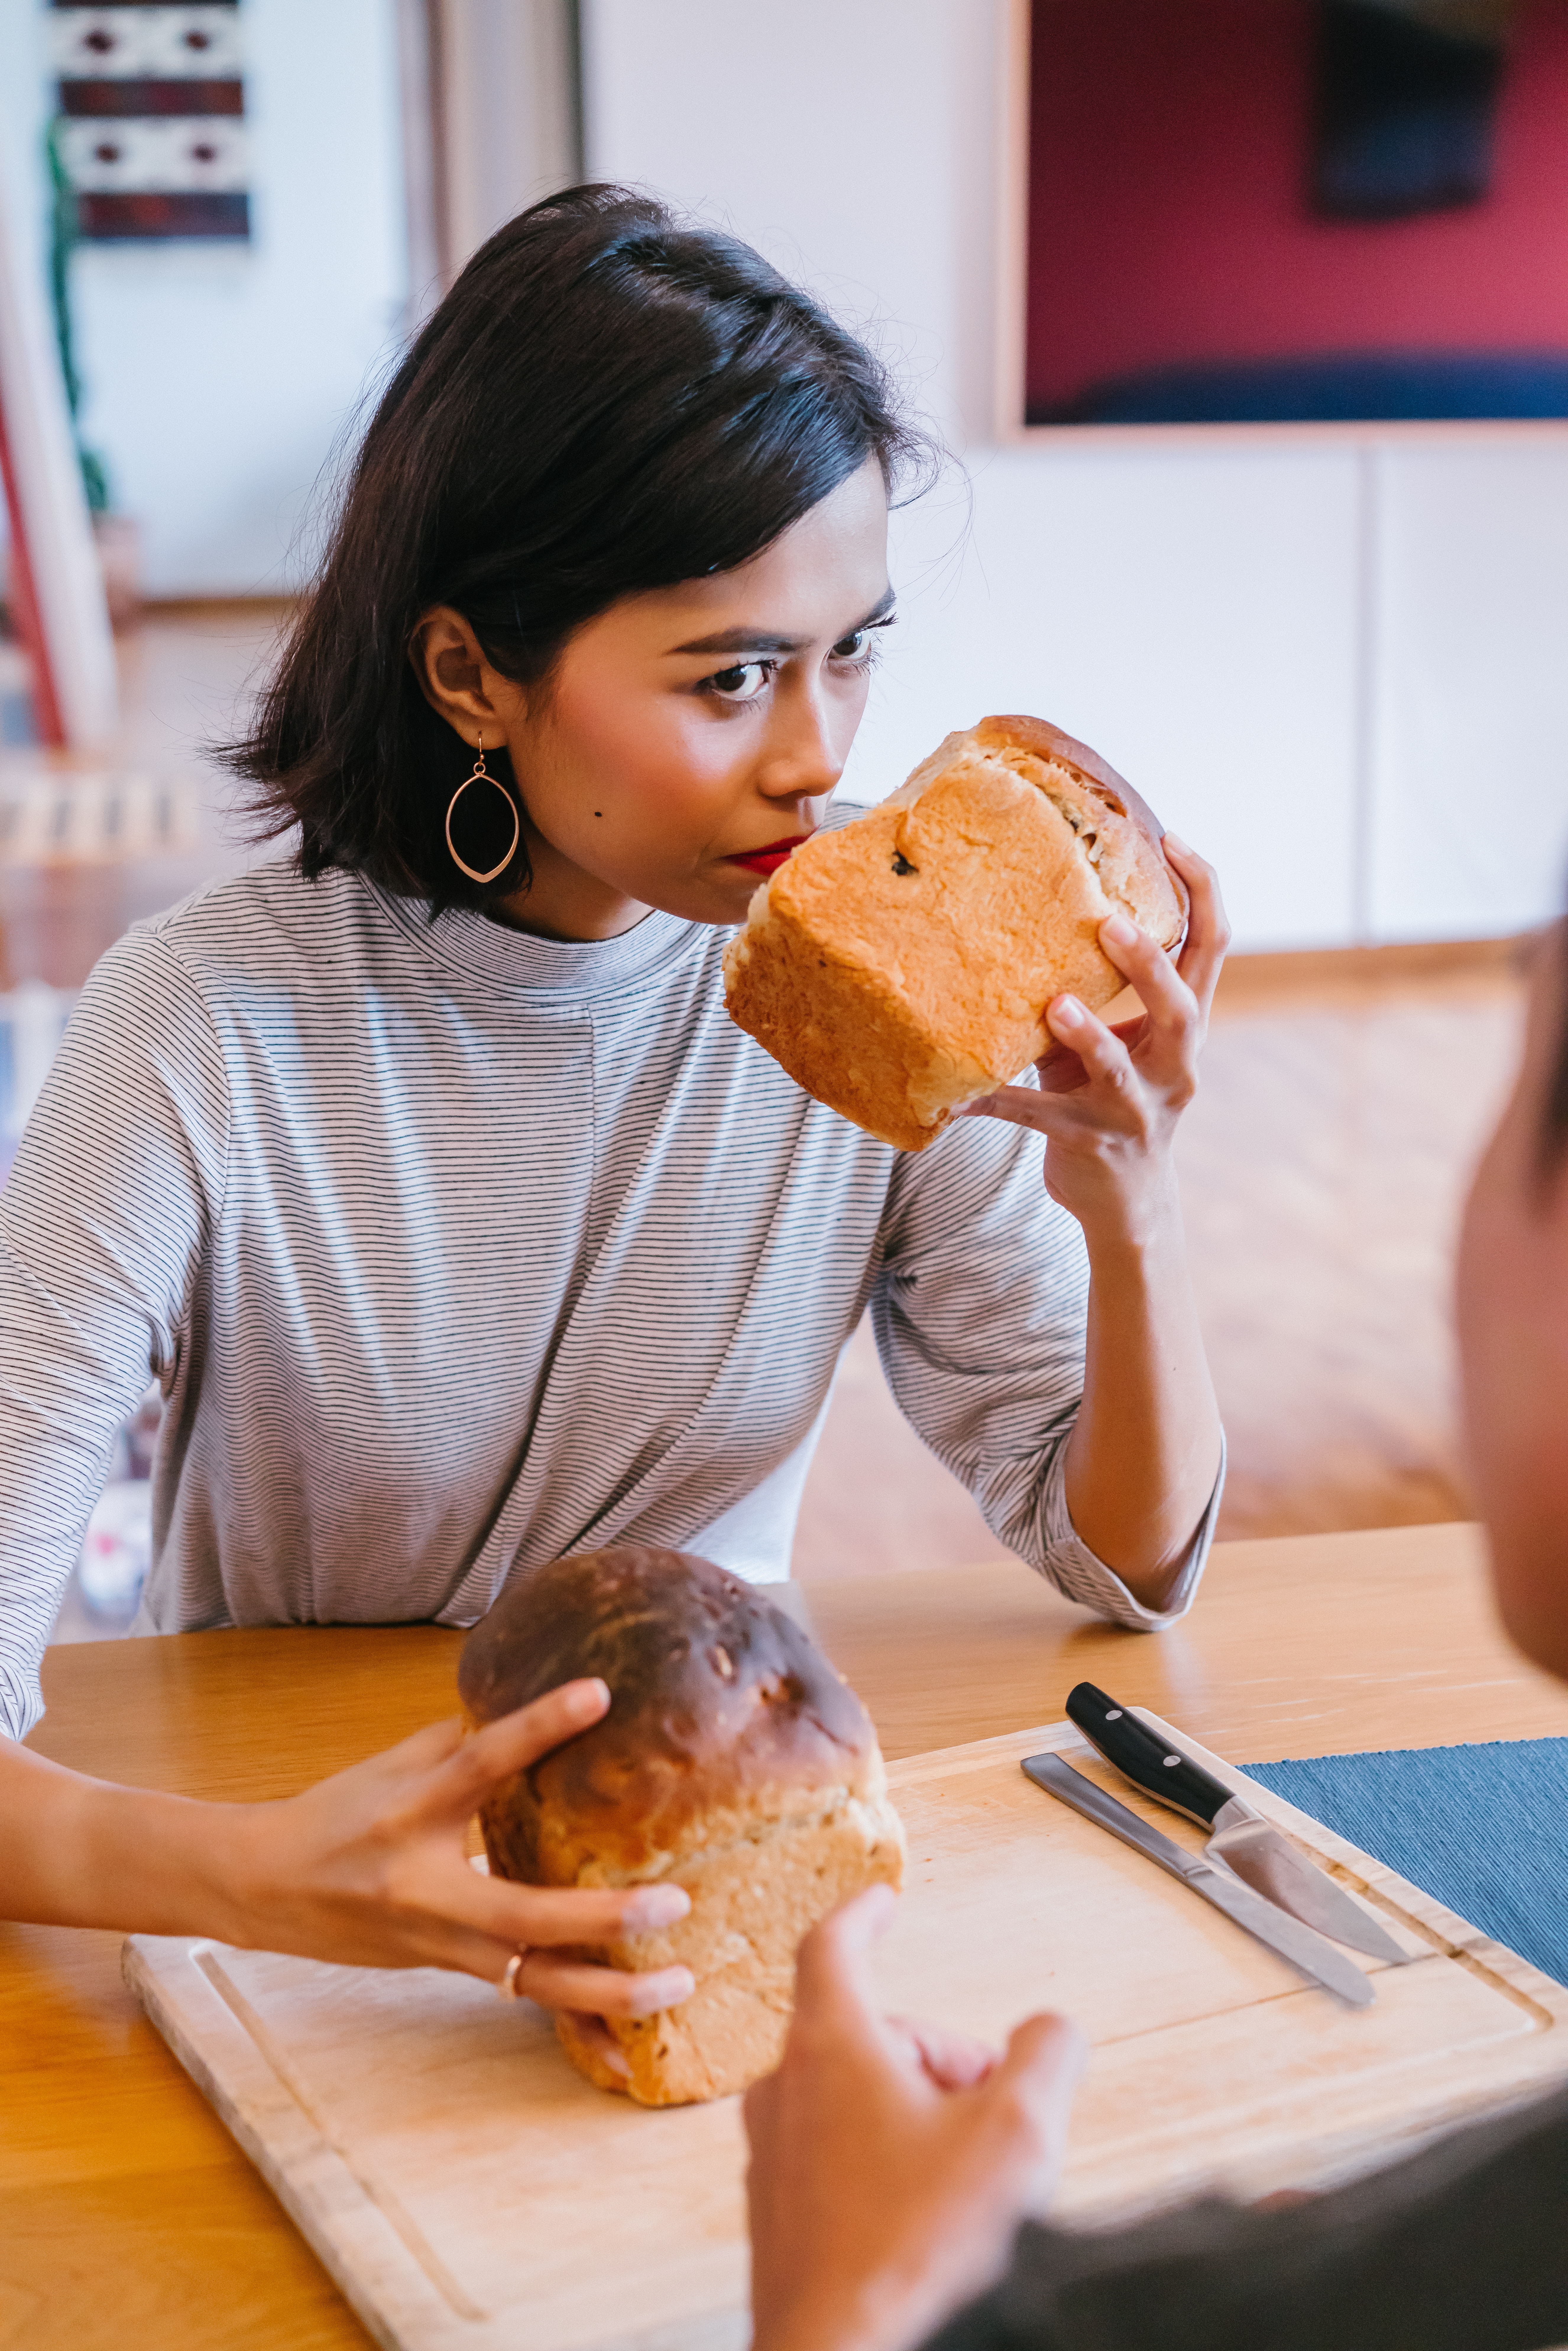 A woman smelling bread